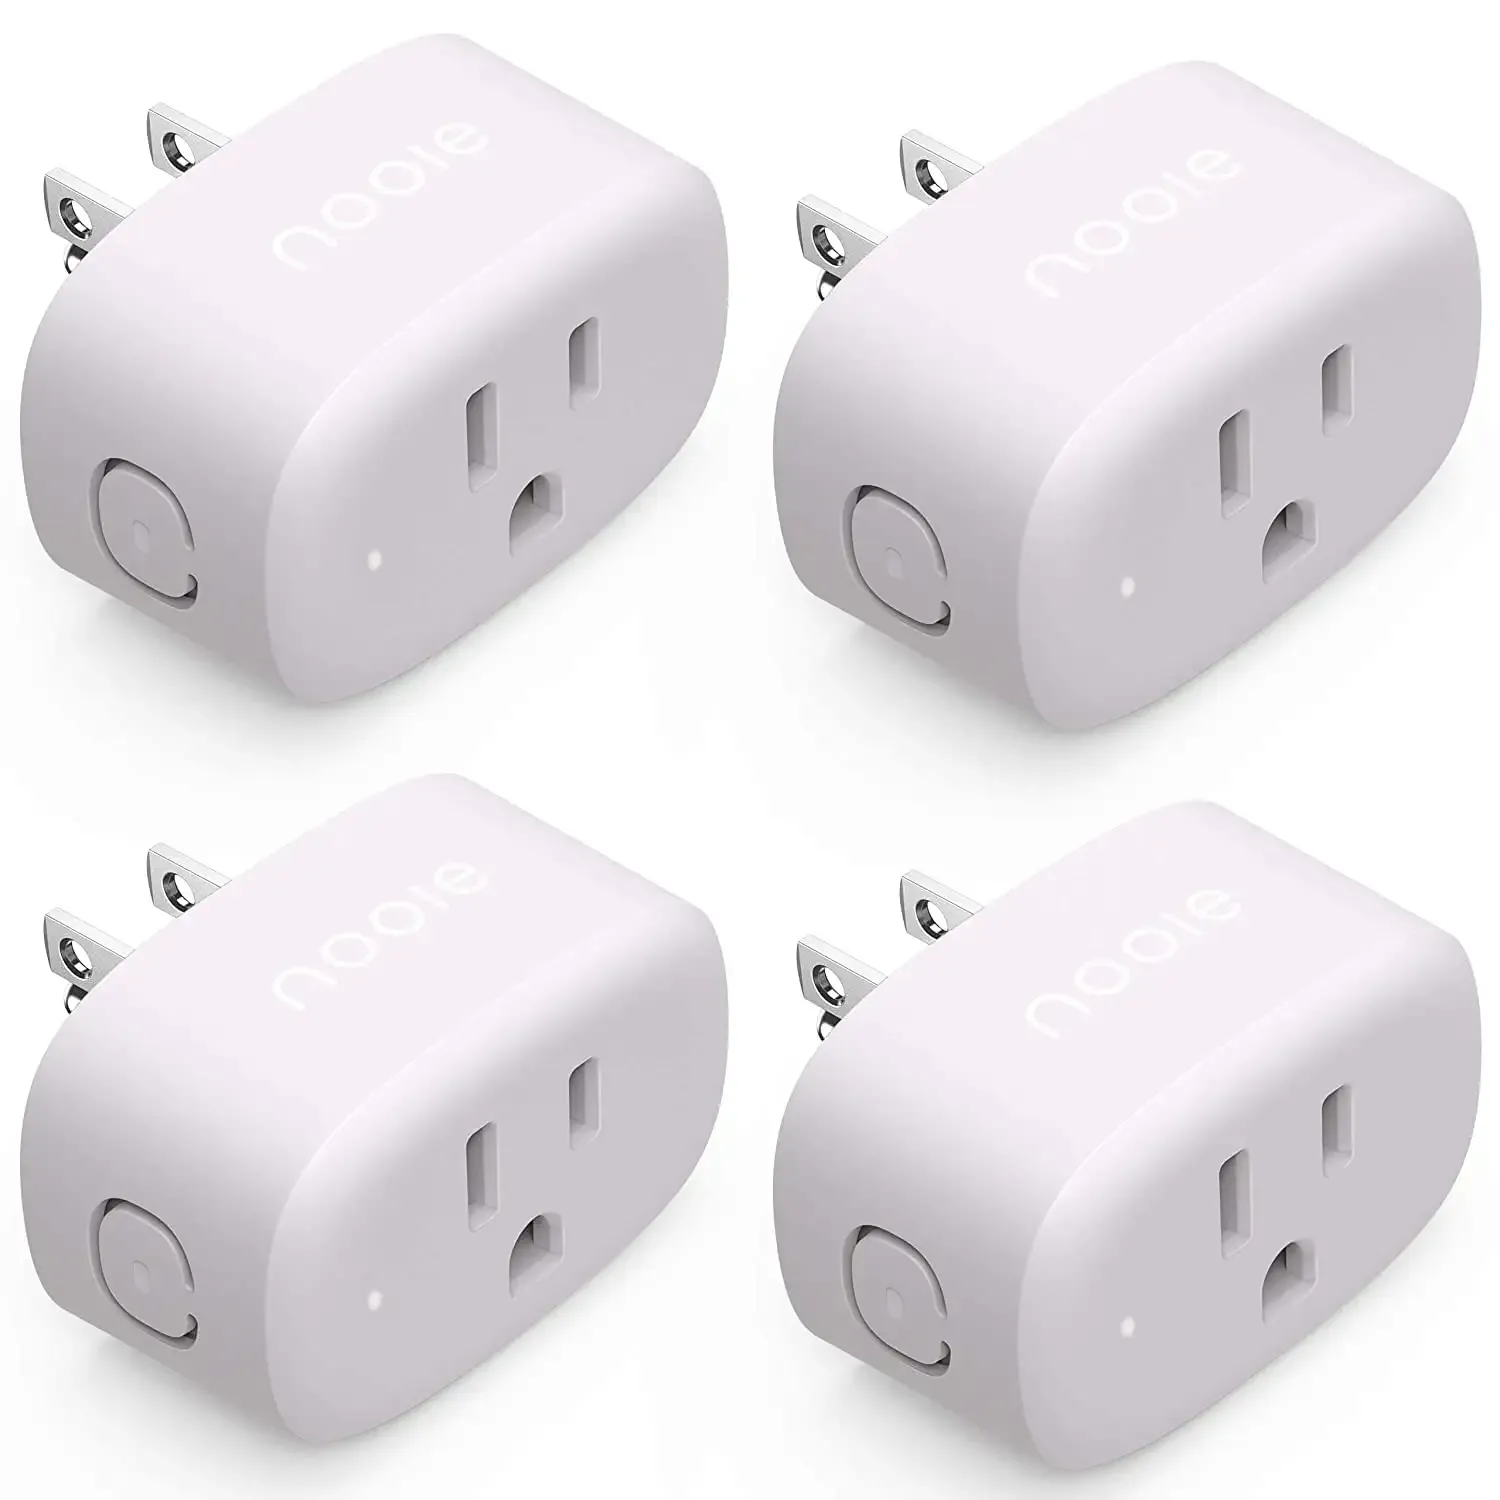 Parents will love the built-in child lock on these smart plugs, ensuring the little ones are safe. The small size means they can easily fit into both sockets on a double wall outlet, there's no hub, and even friends and family can control them. Create custom schedules in the app or integrate with Google Home.